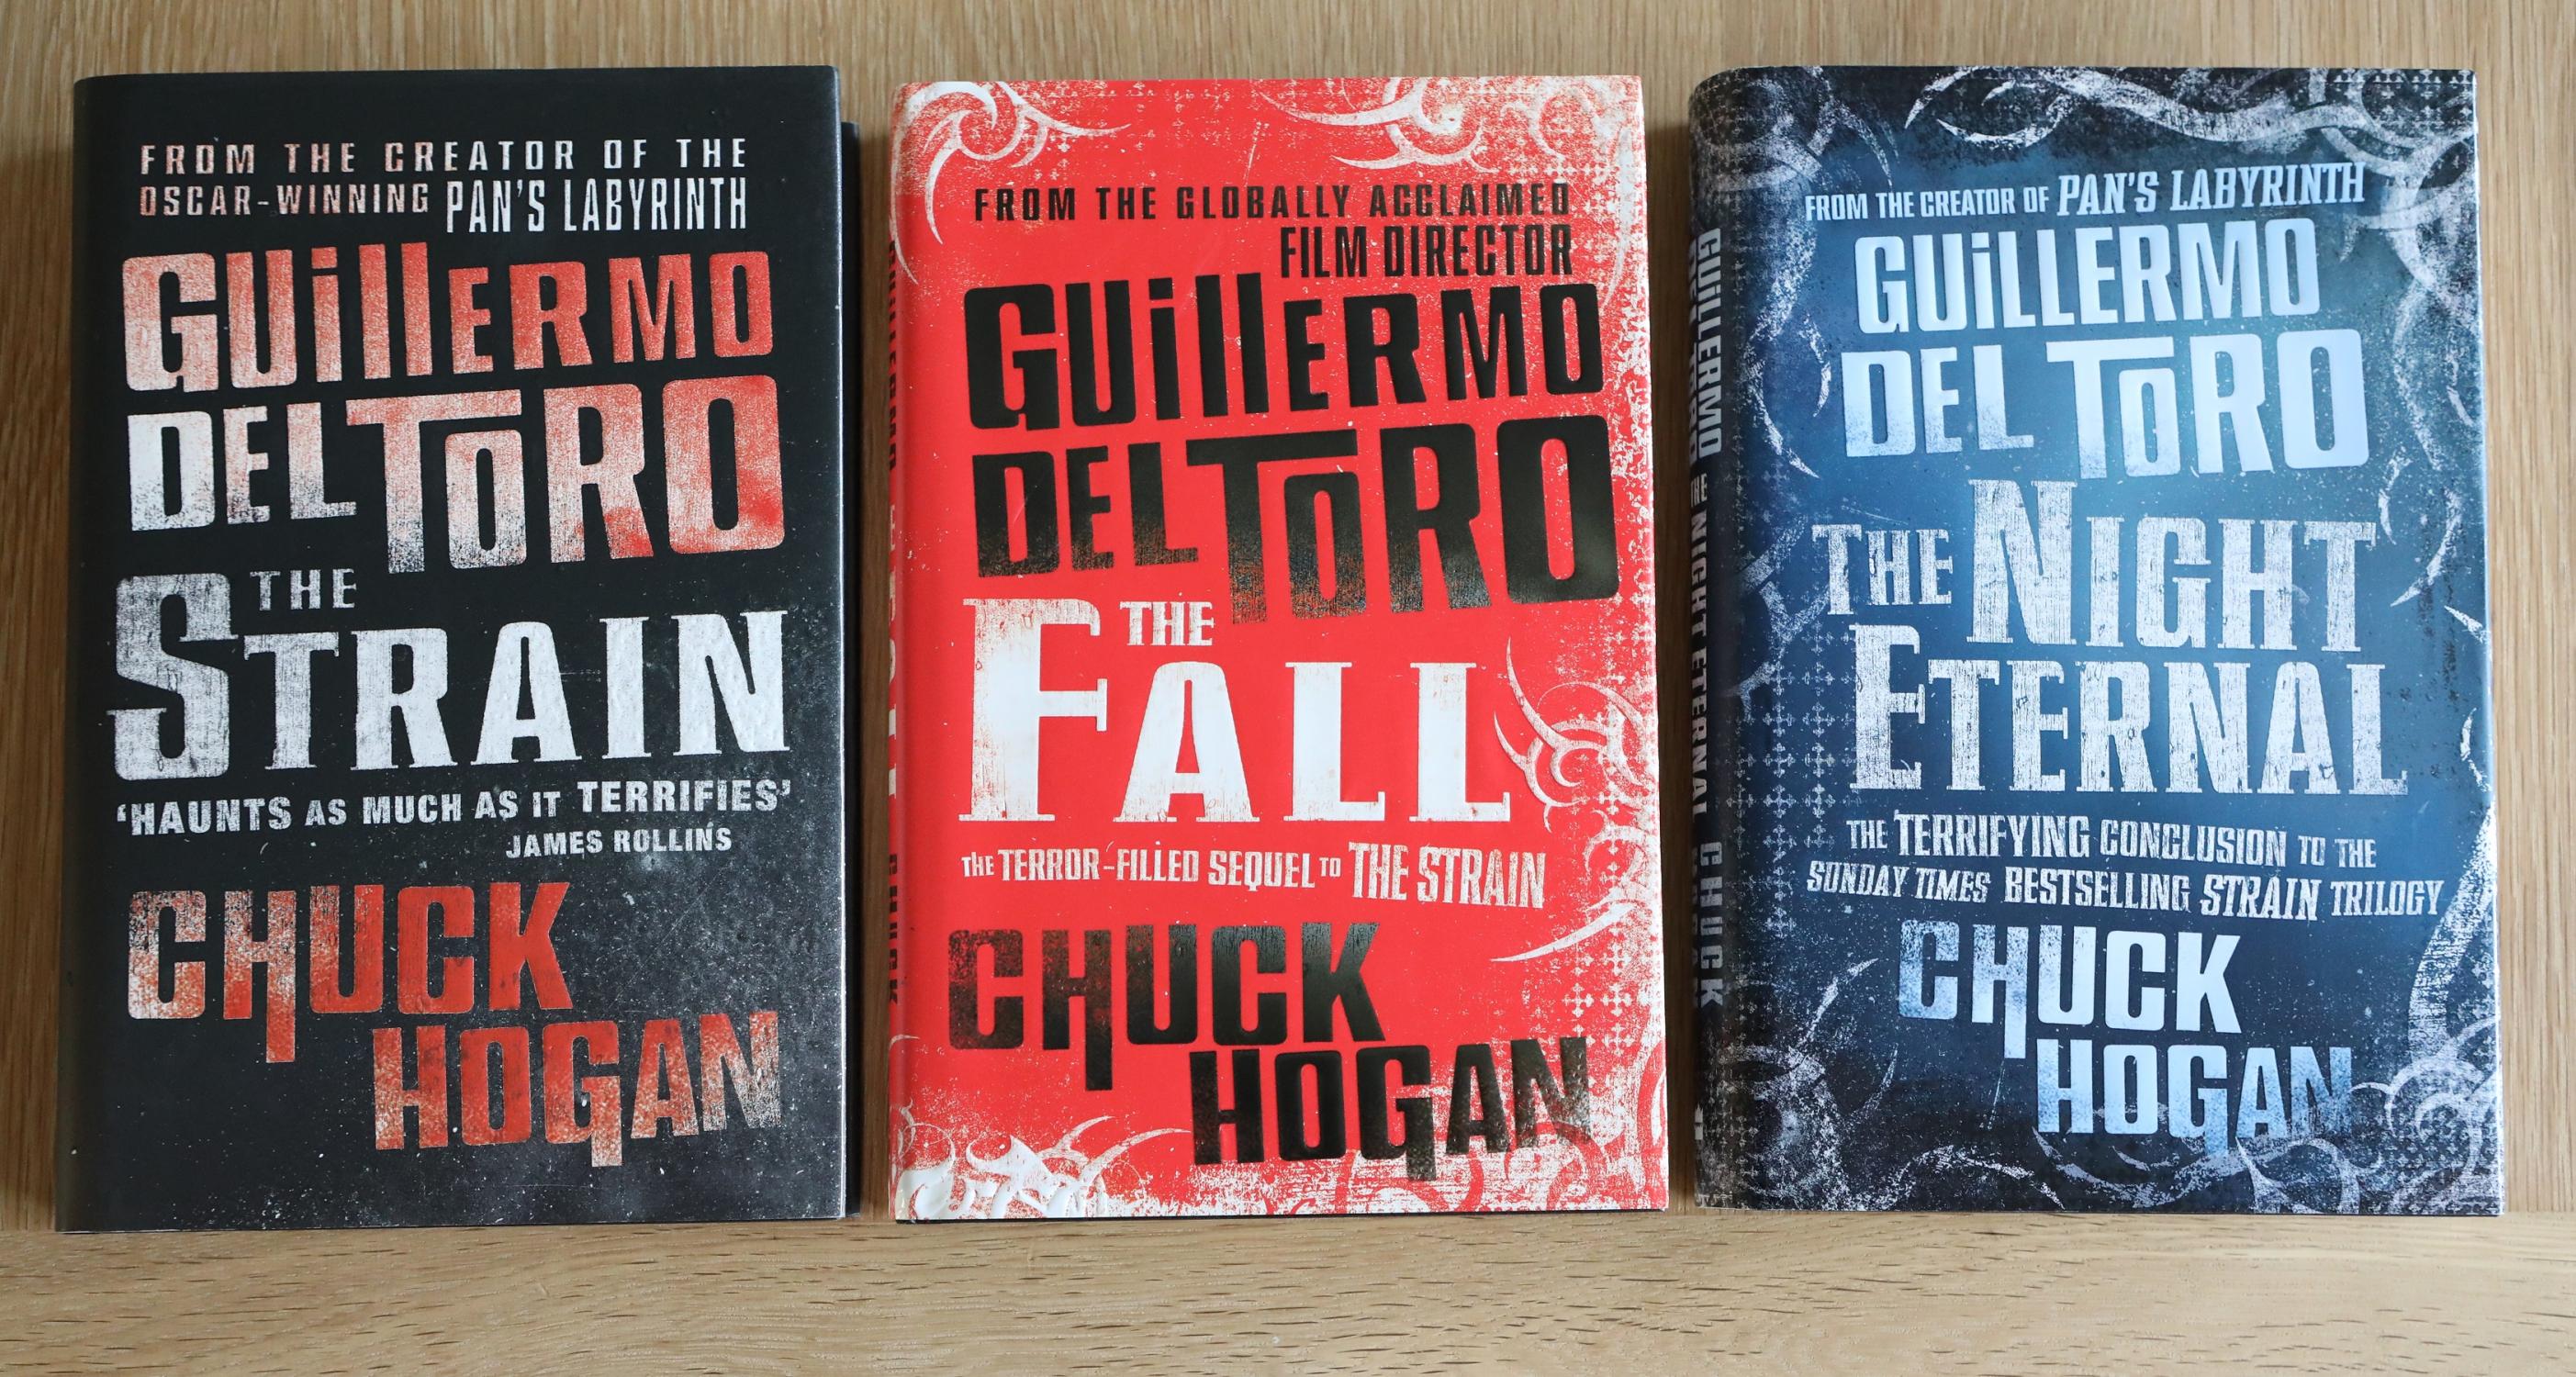 The Strain signed lined and dated first editions by Guillermo Toro & Hogan: New Hardcover (2009) 1st Edition, Signed by Author(s) | Analecta Books